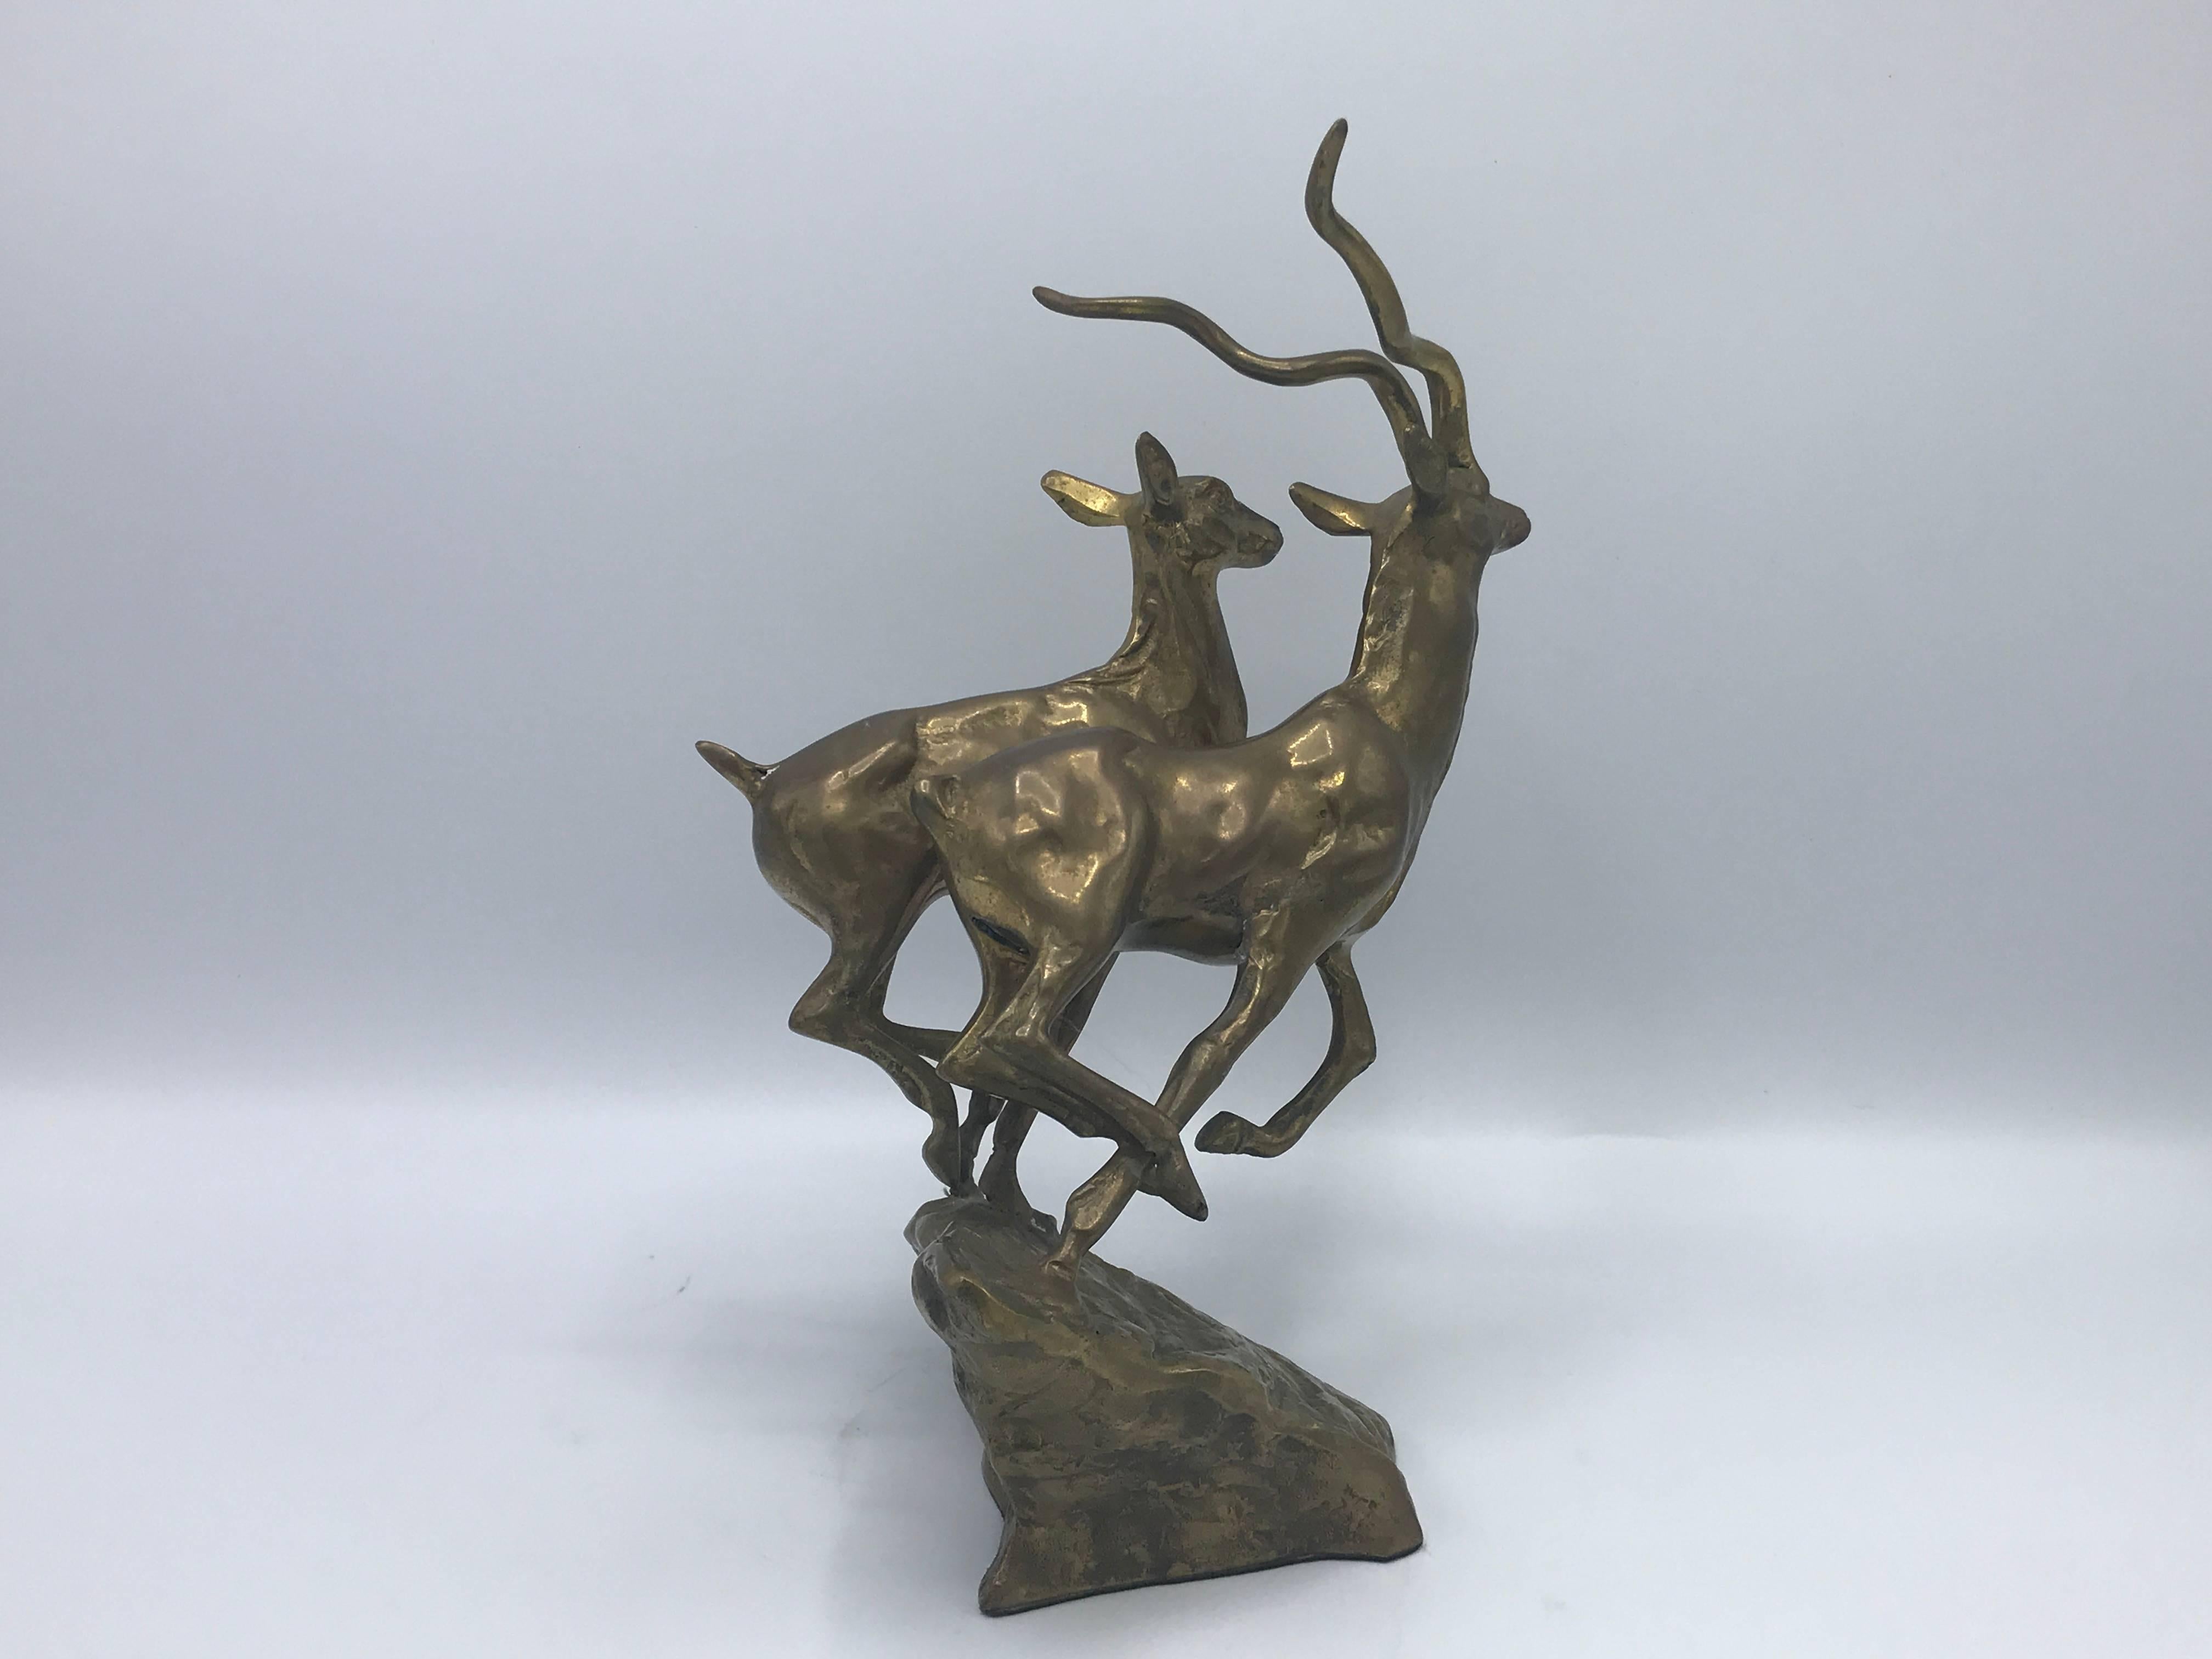 Offered is a beautiful, 1960s brass running kudu antelope sculpture. Male and female.